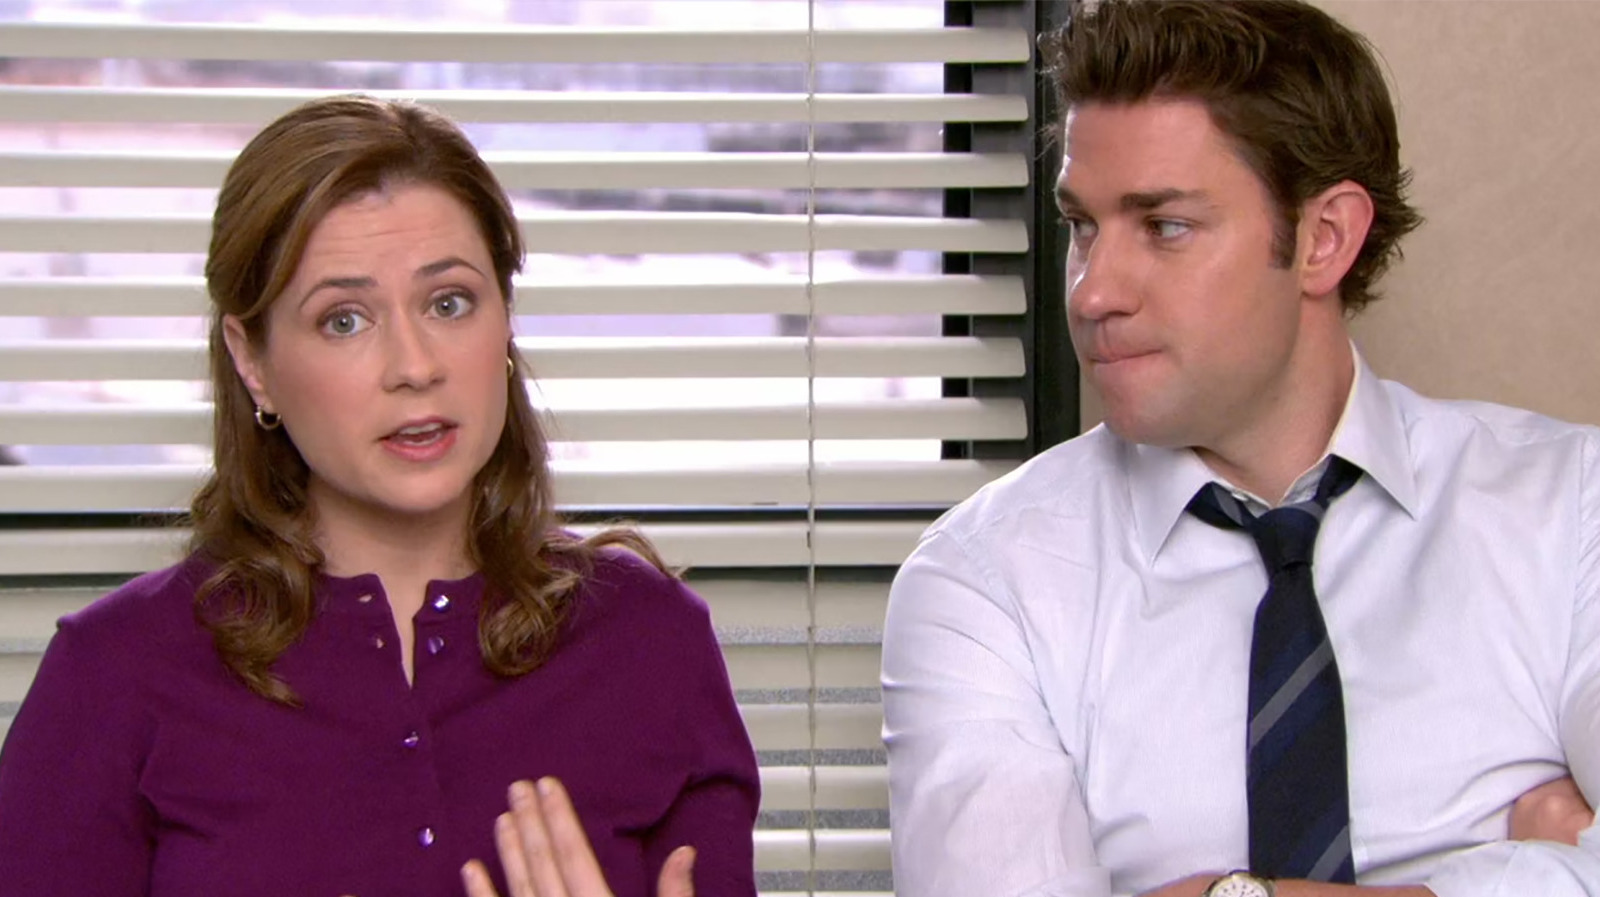 Jim Finally Asks Pam Out - The Office 